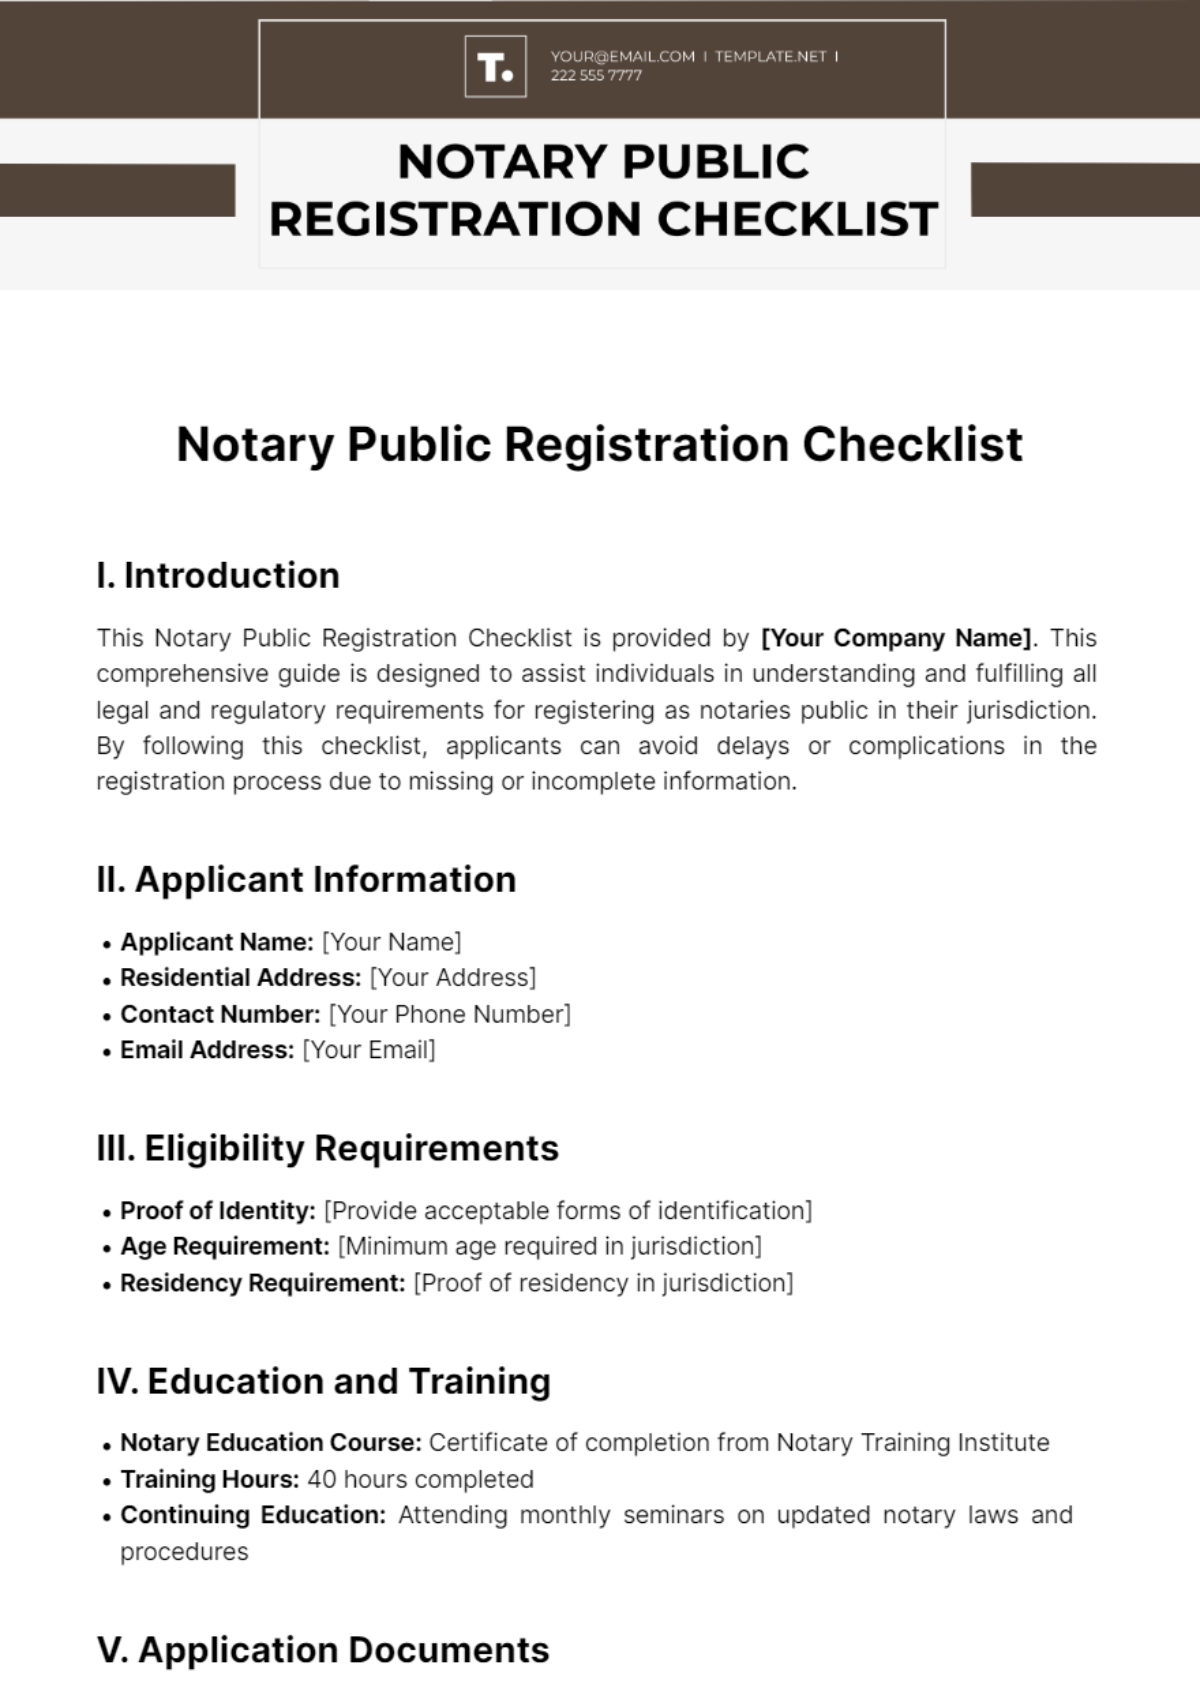 Free Notary Public Registration Checklist Template